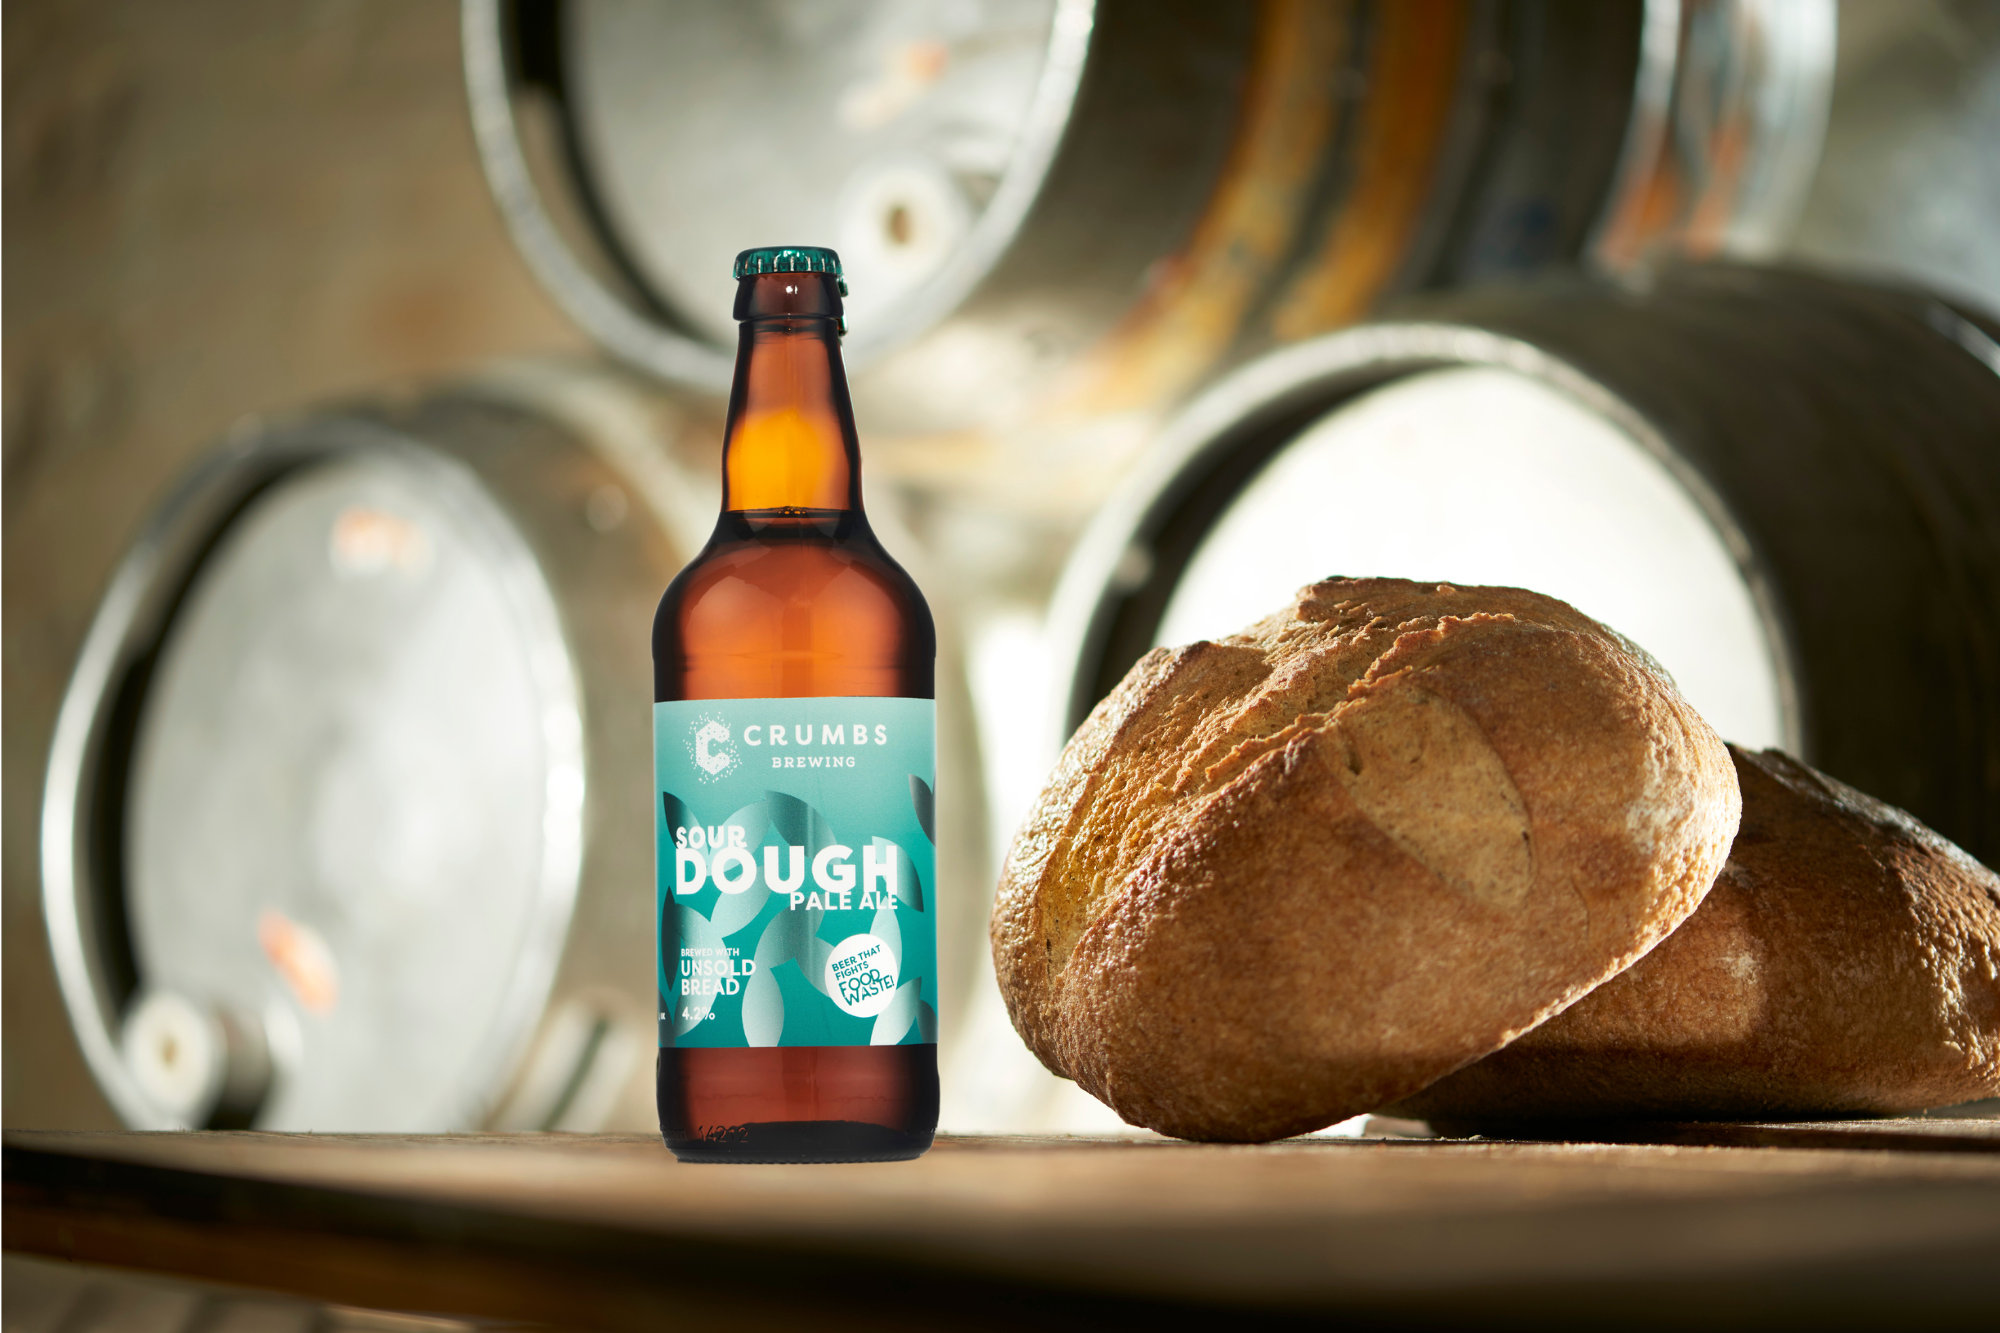 Image of a beer bottle made by sustainable craft brewery, Crumbs Brewing. The bottle is is on a flat surface with metal beer barrels stacked behind and a loaf of bread next to it.